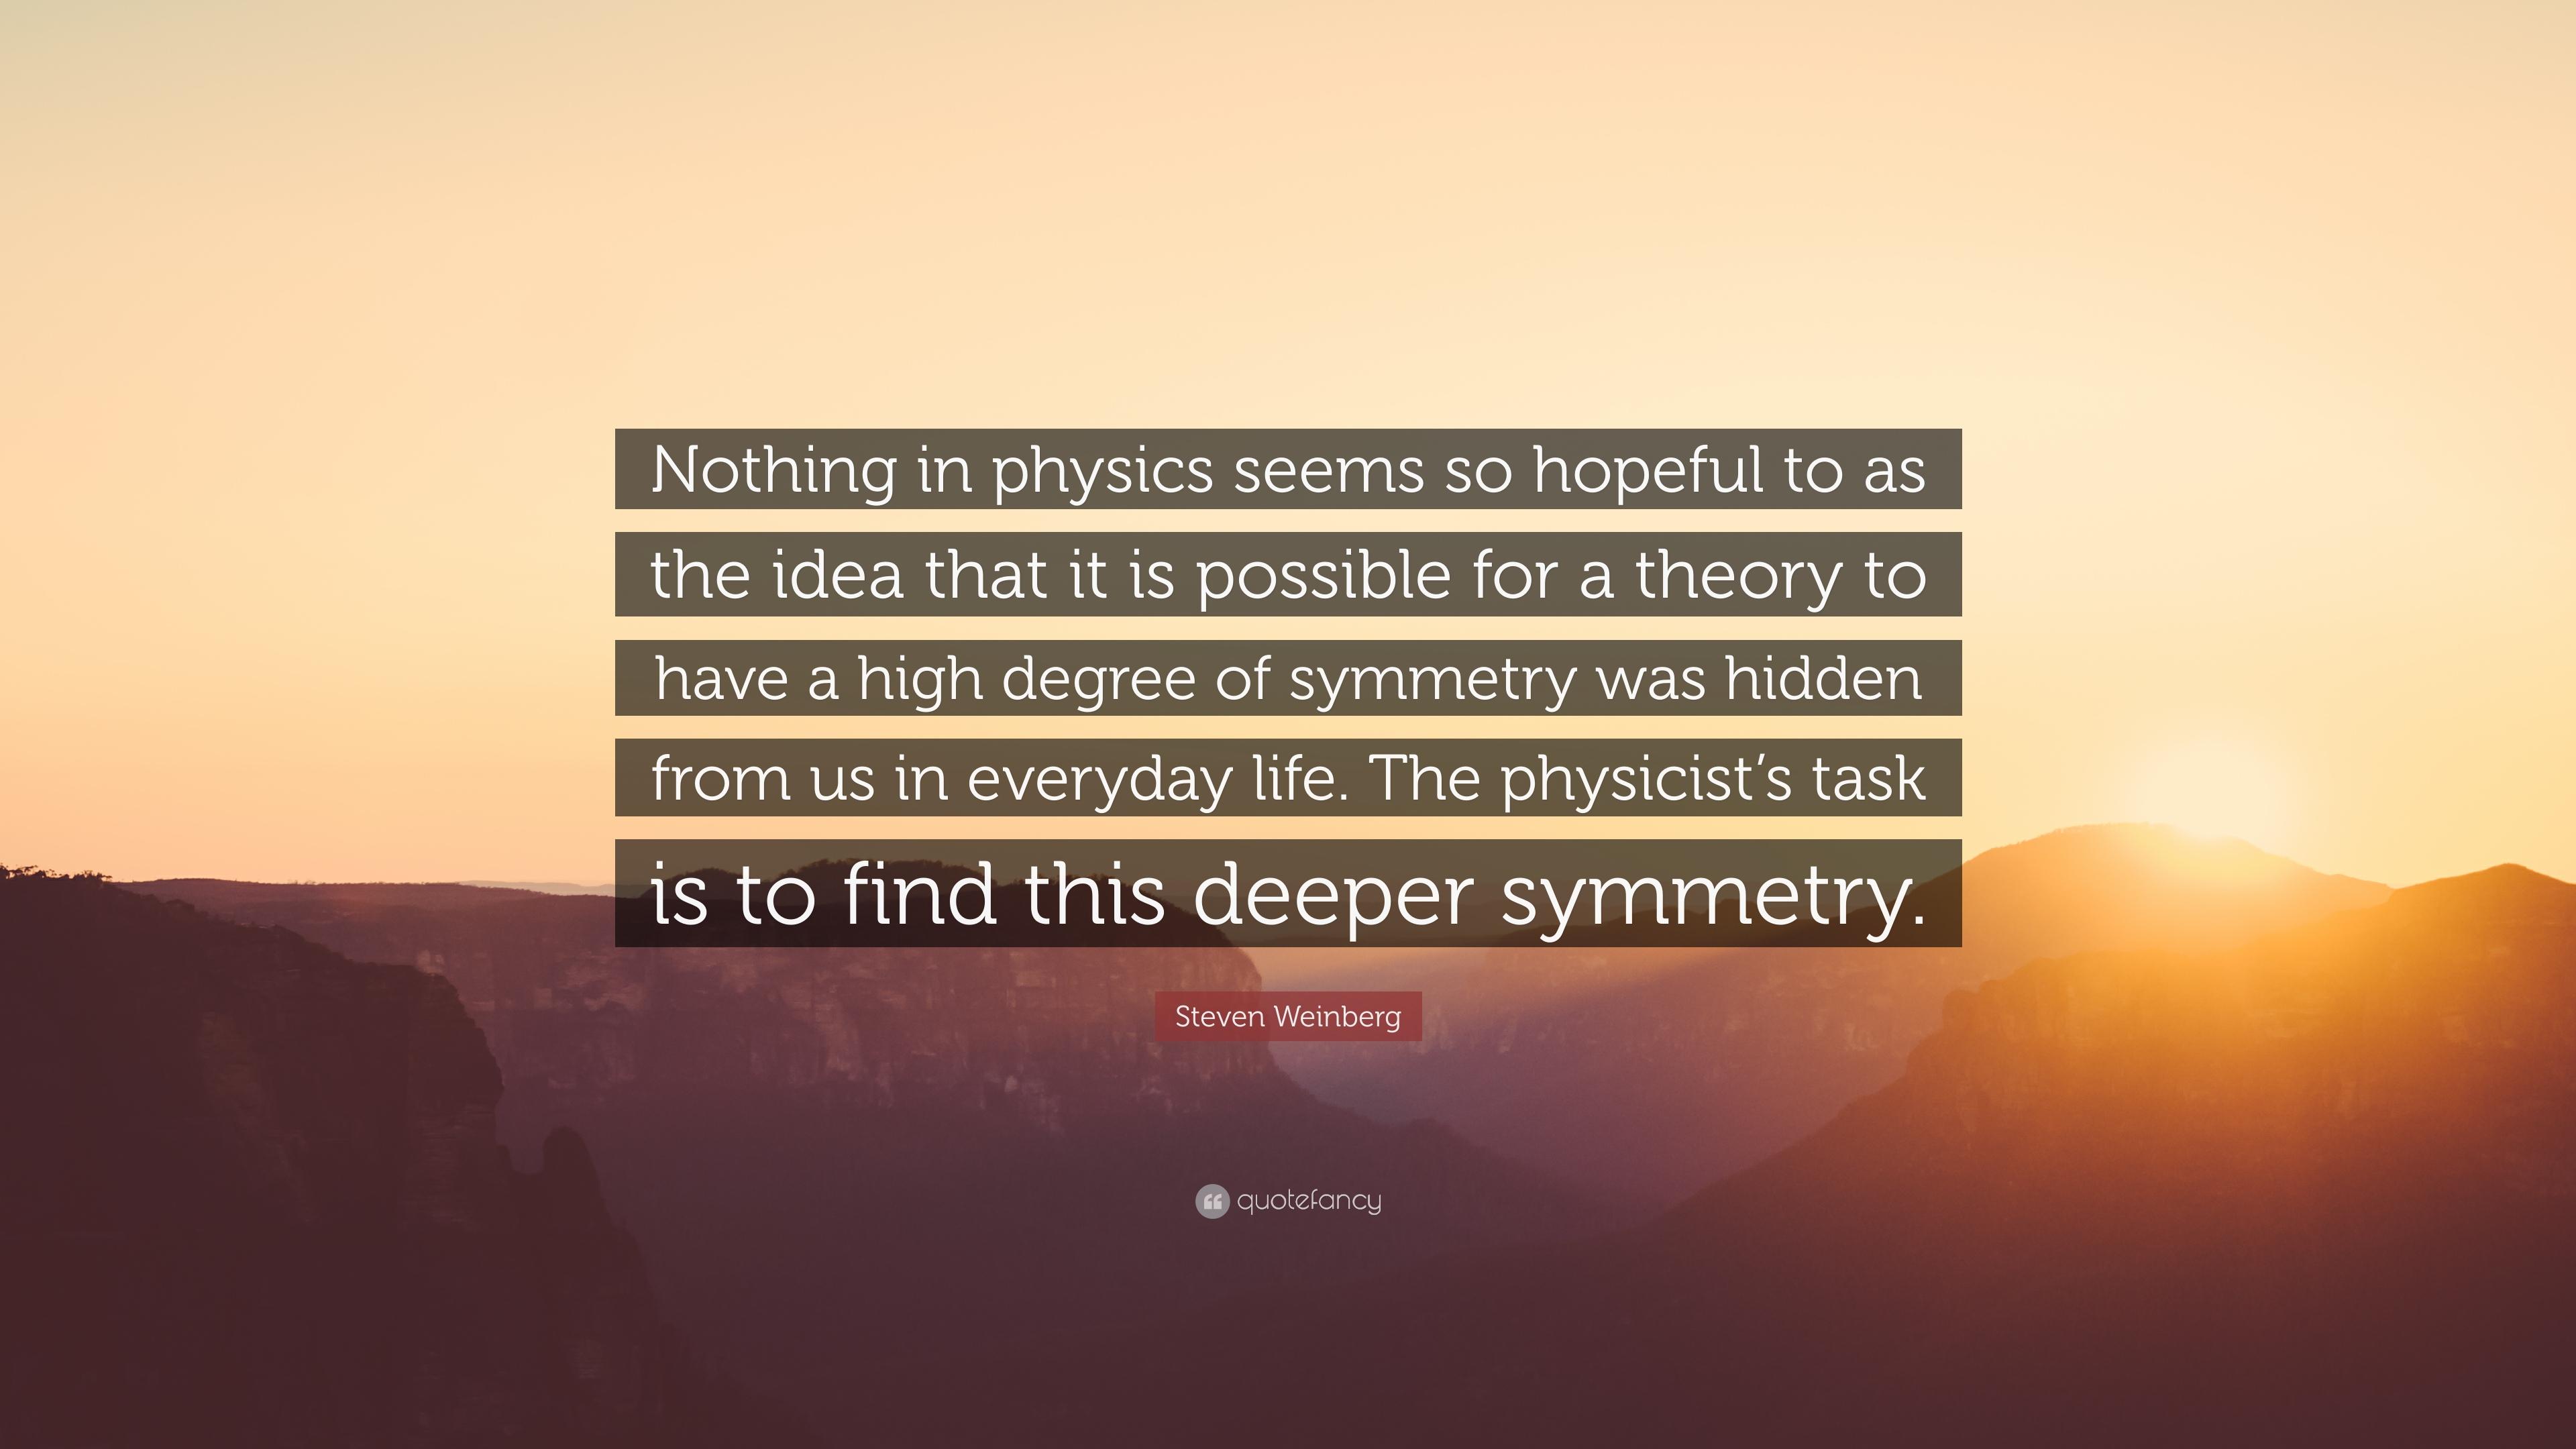 Steven Weinberg Quote: “Nothing in physics seems so hopeful